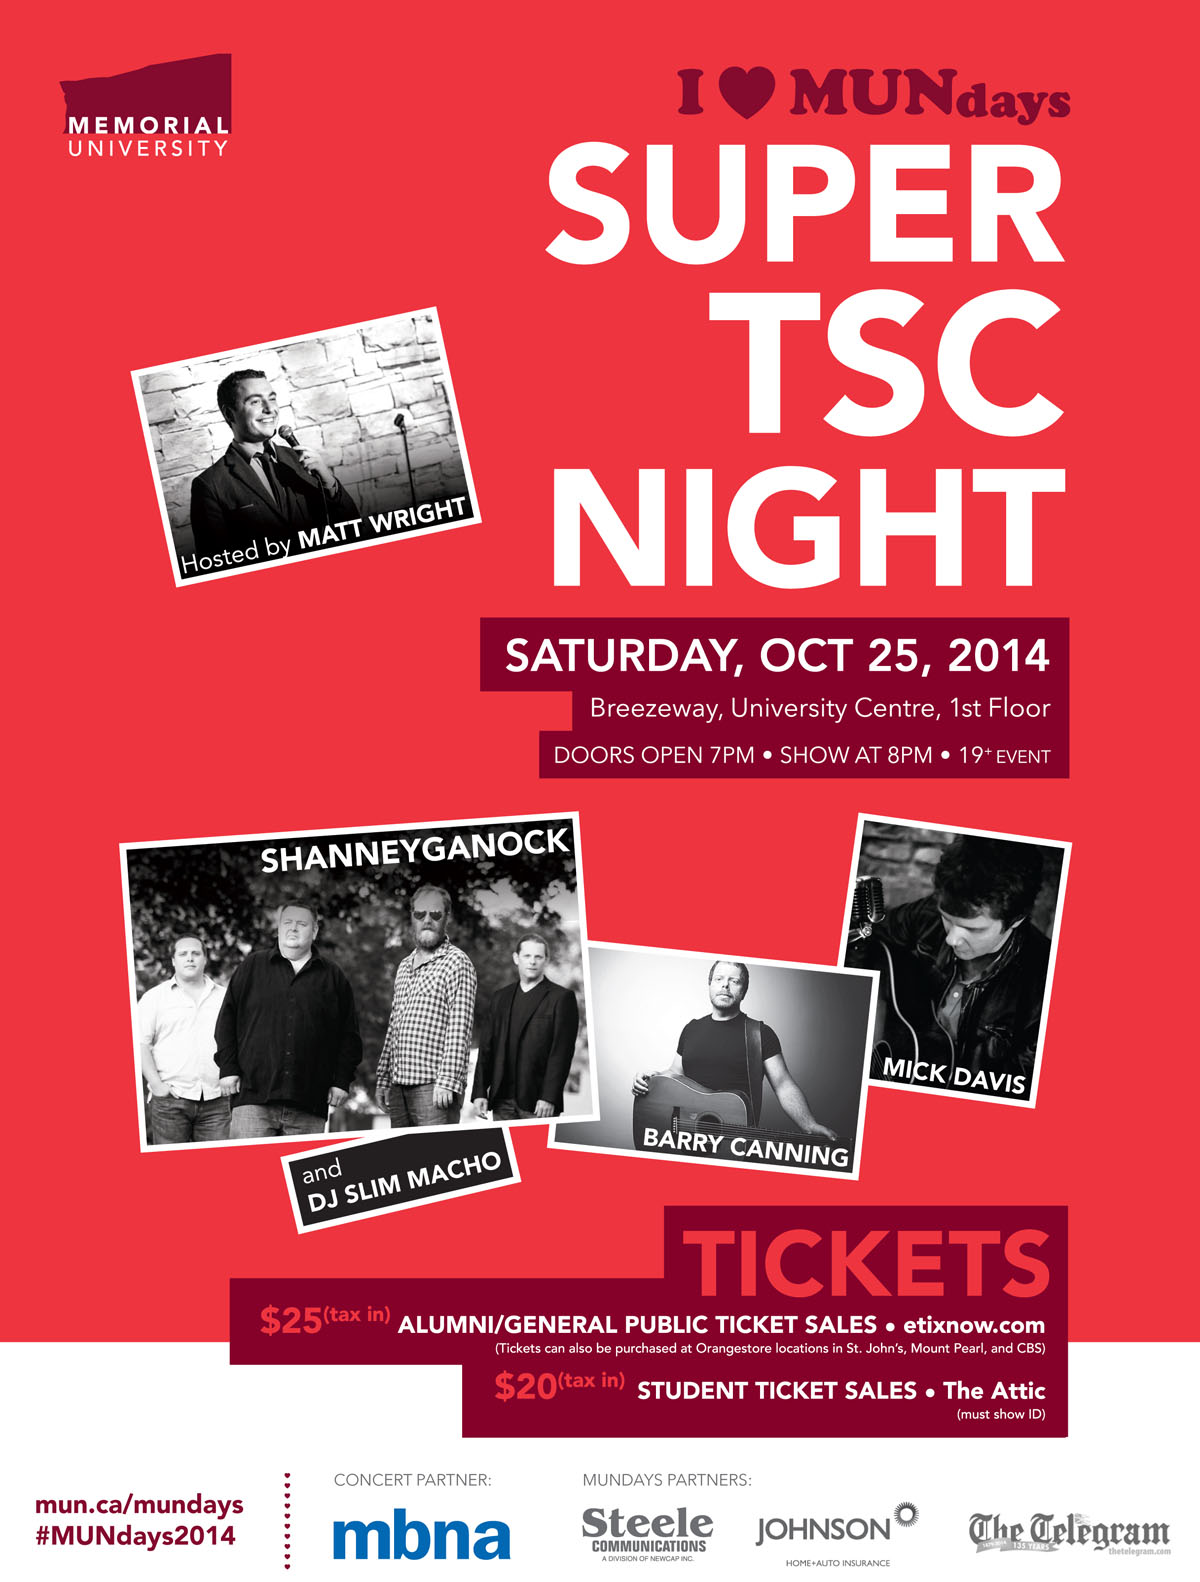 The Super TSC Night Concert takes place Saturday, Oct. 25. For ticket info, go to www.mun.ca/mundays